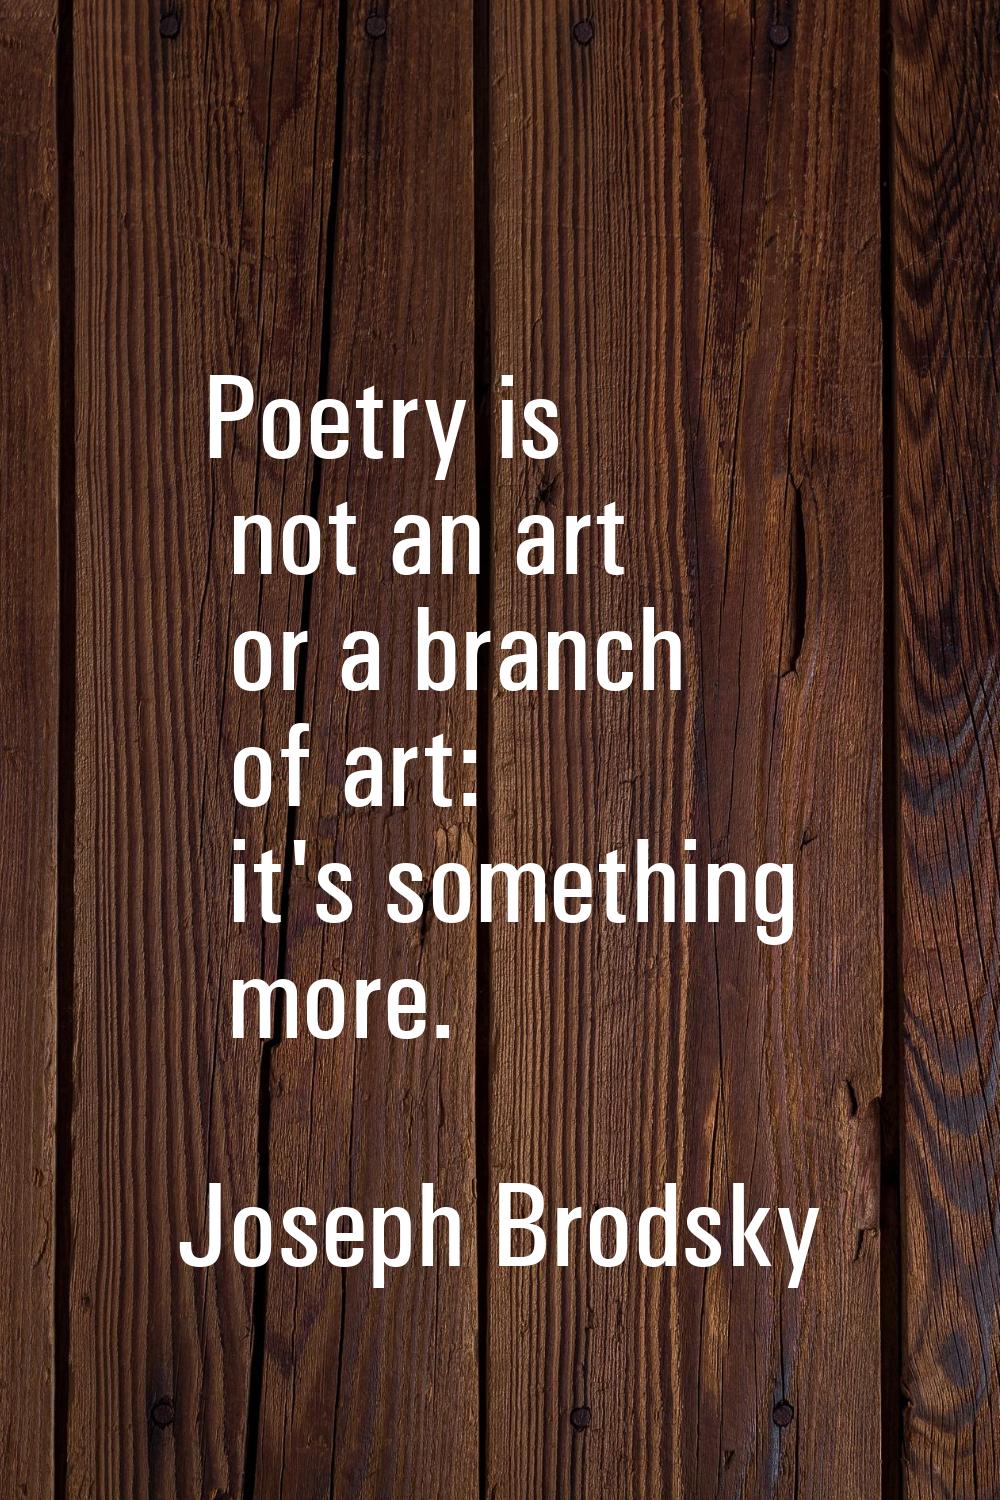 Poetry is not an art or a branch of art: it's something more.